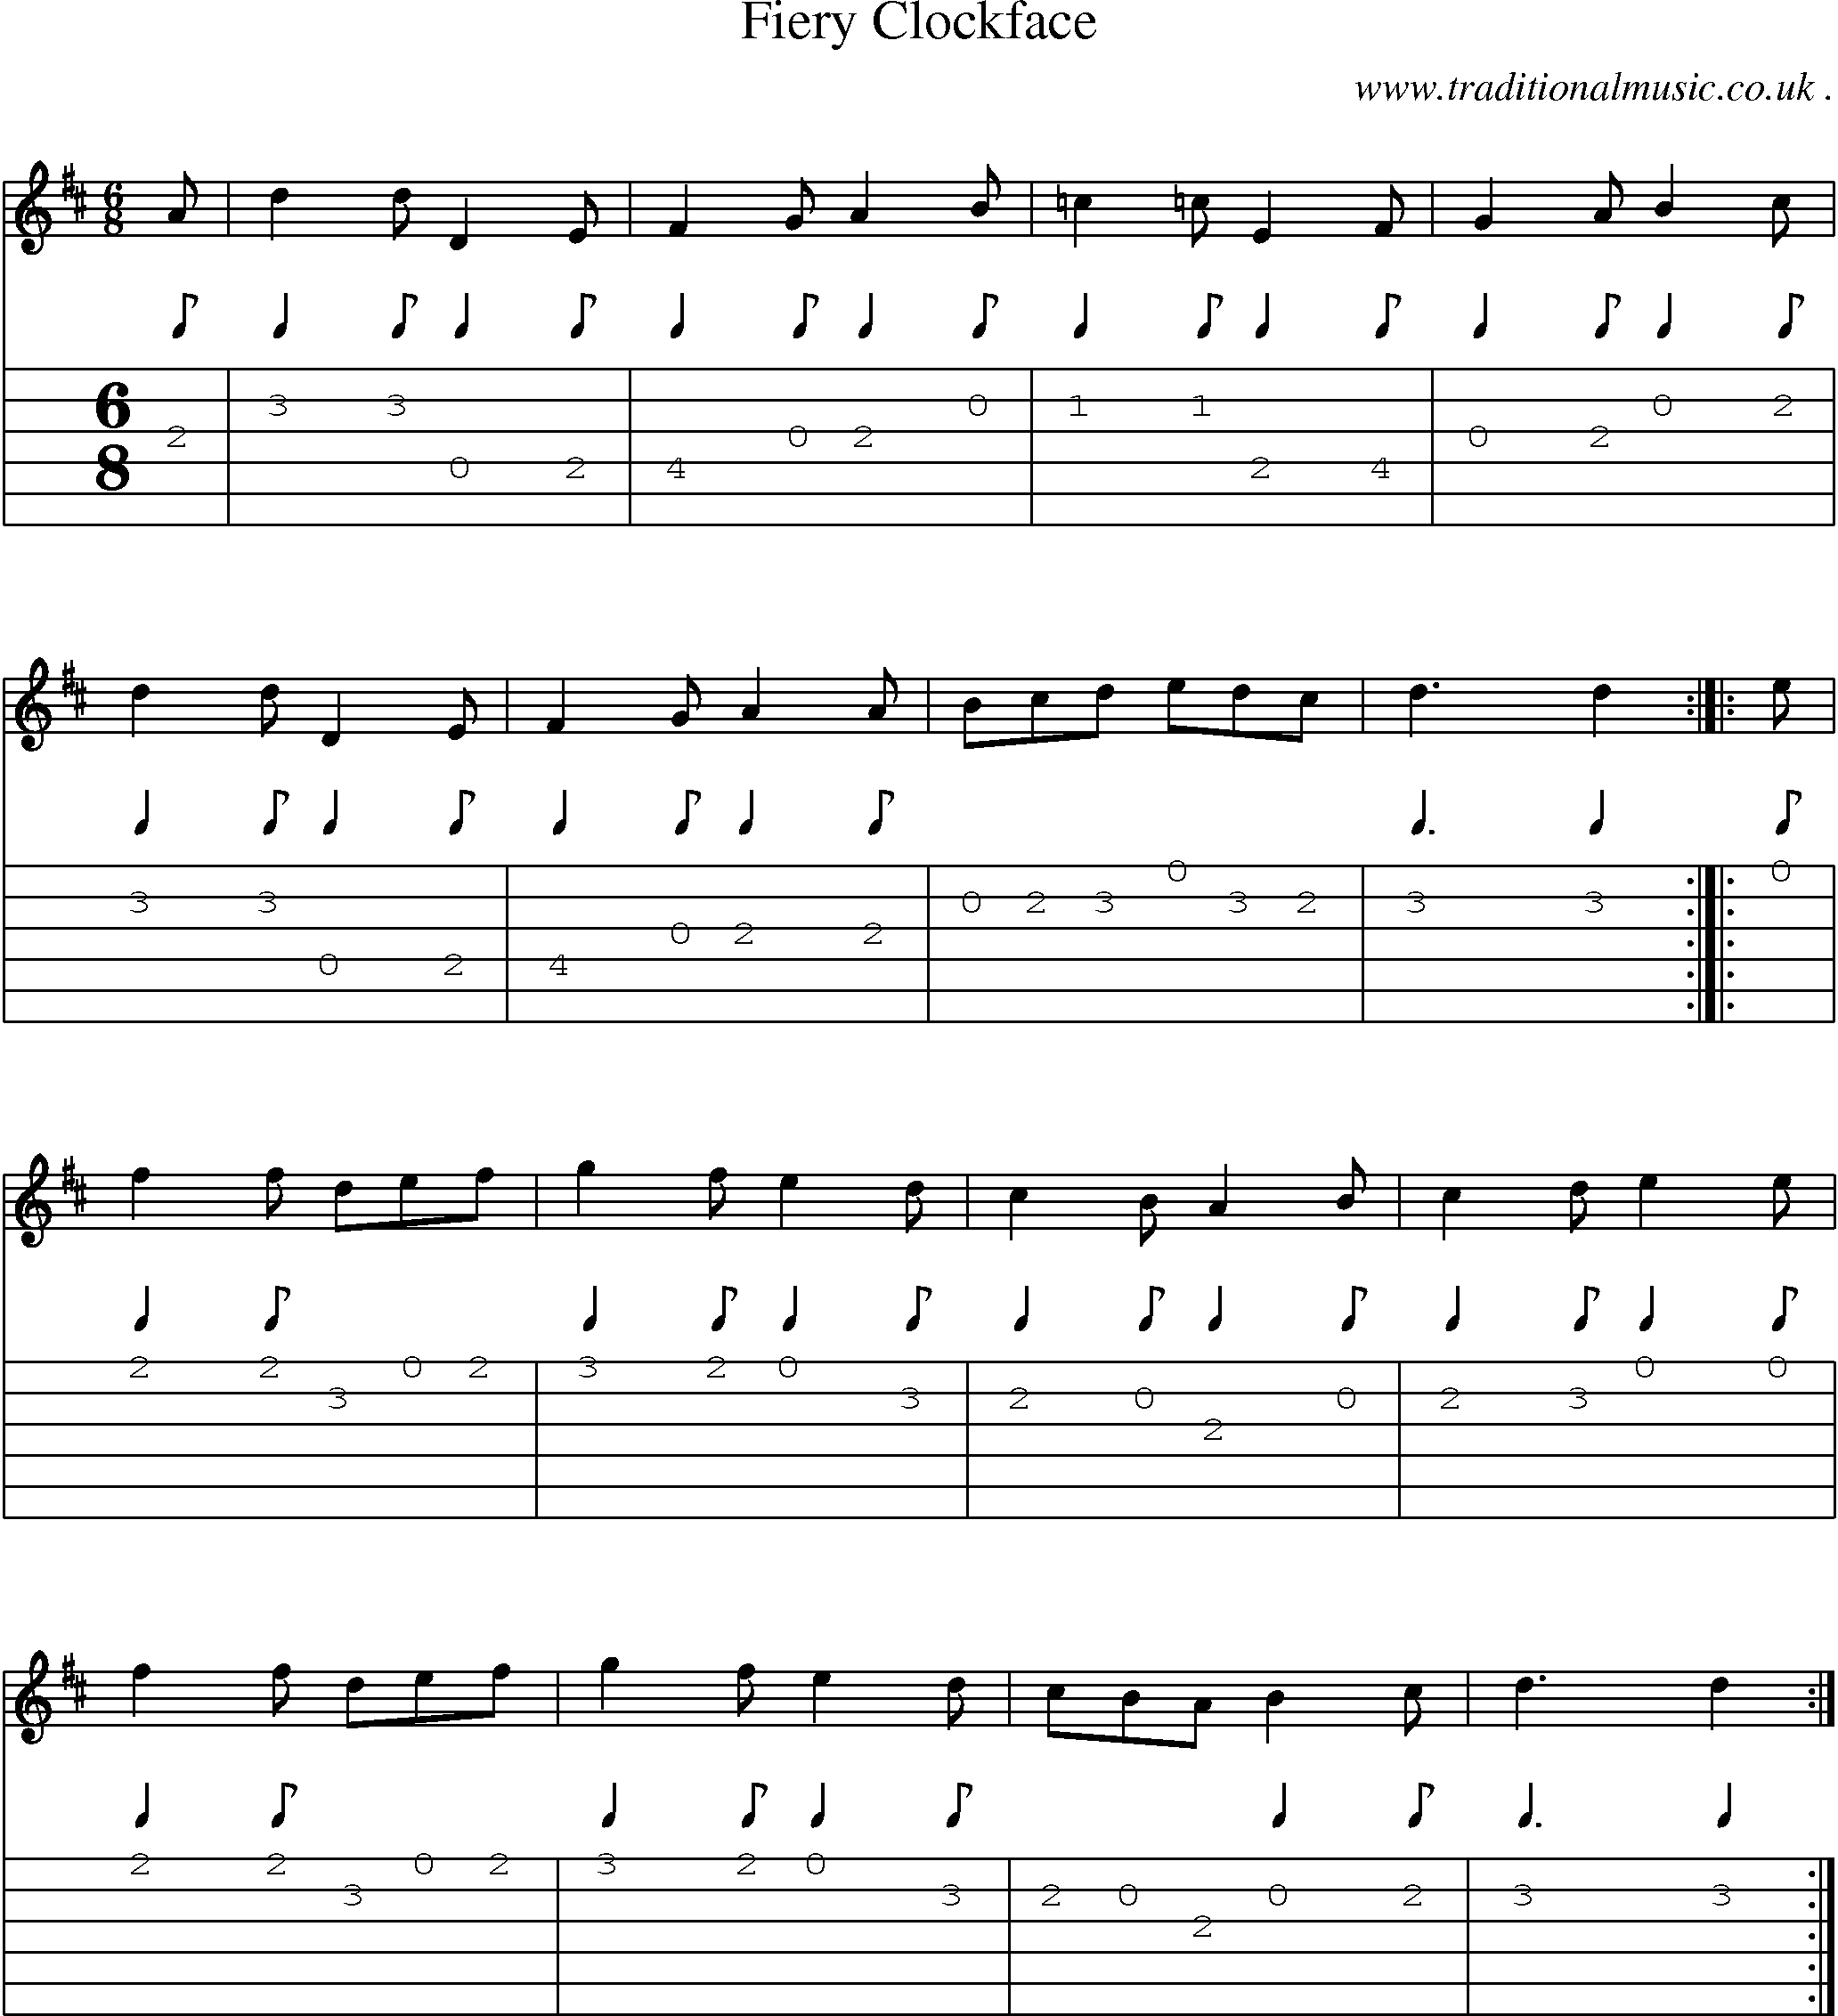 Sheet-Music and Guitar Tabs for Fiery Clockface